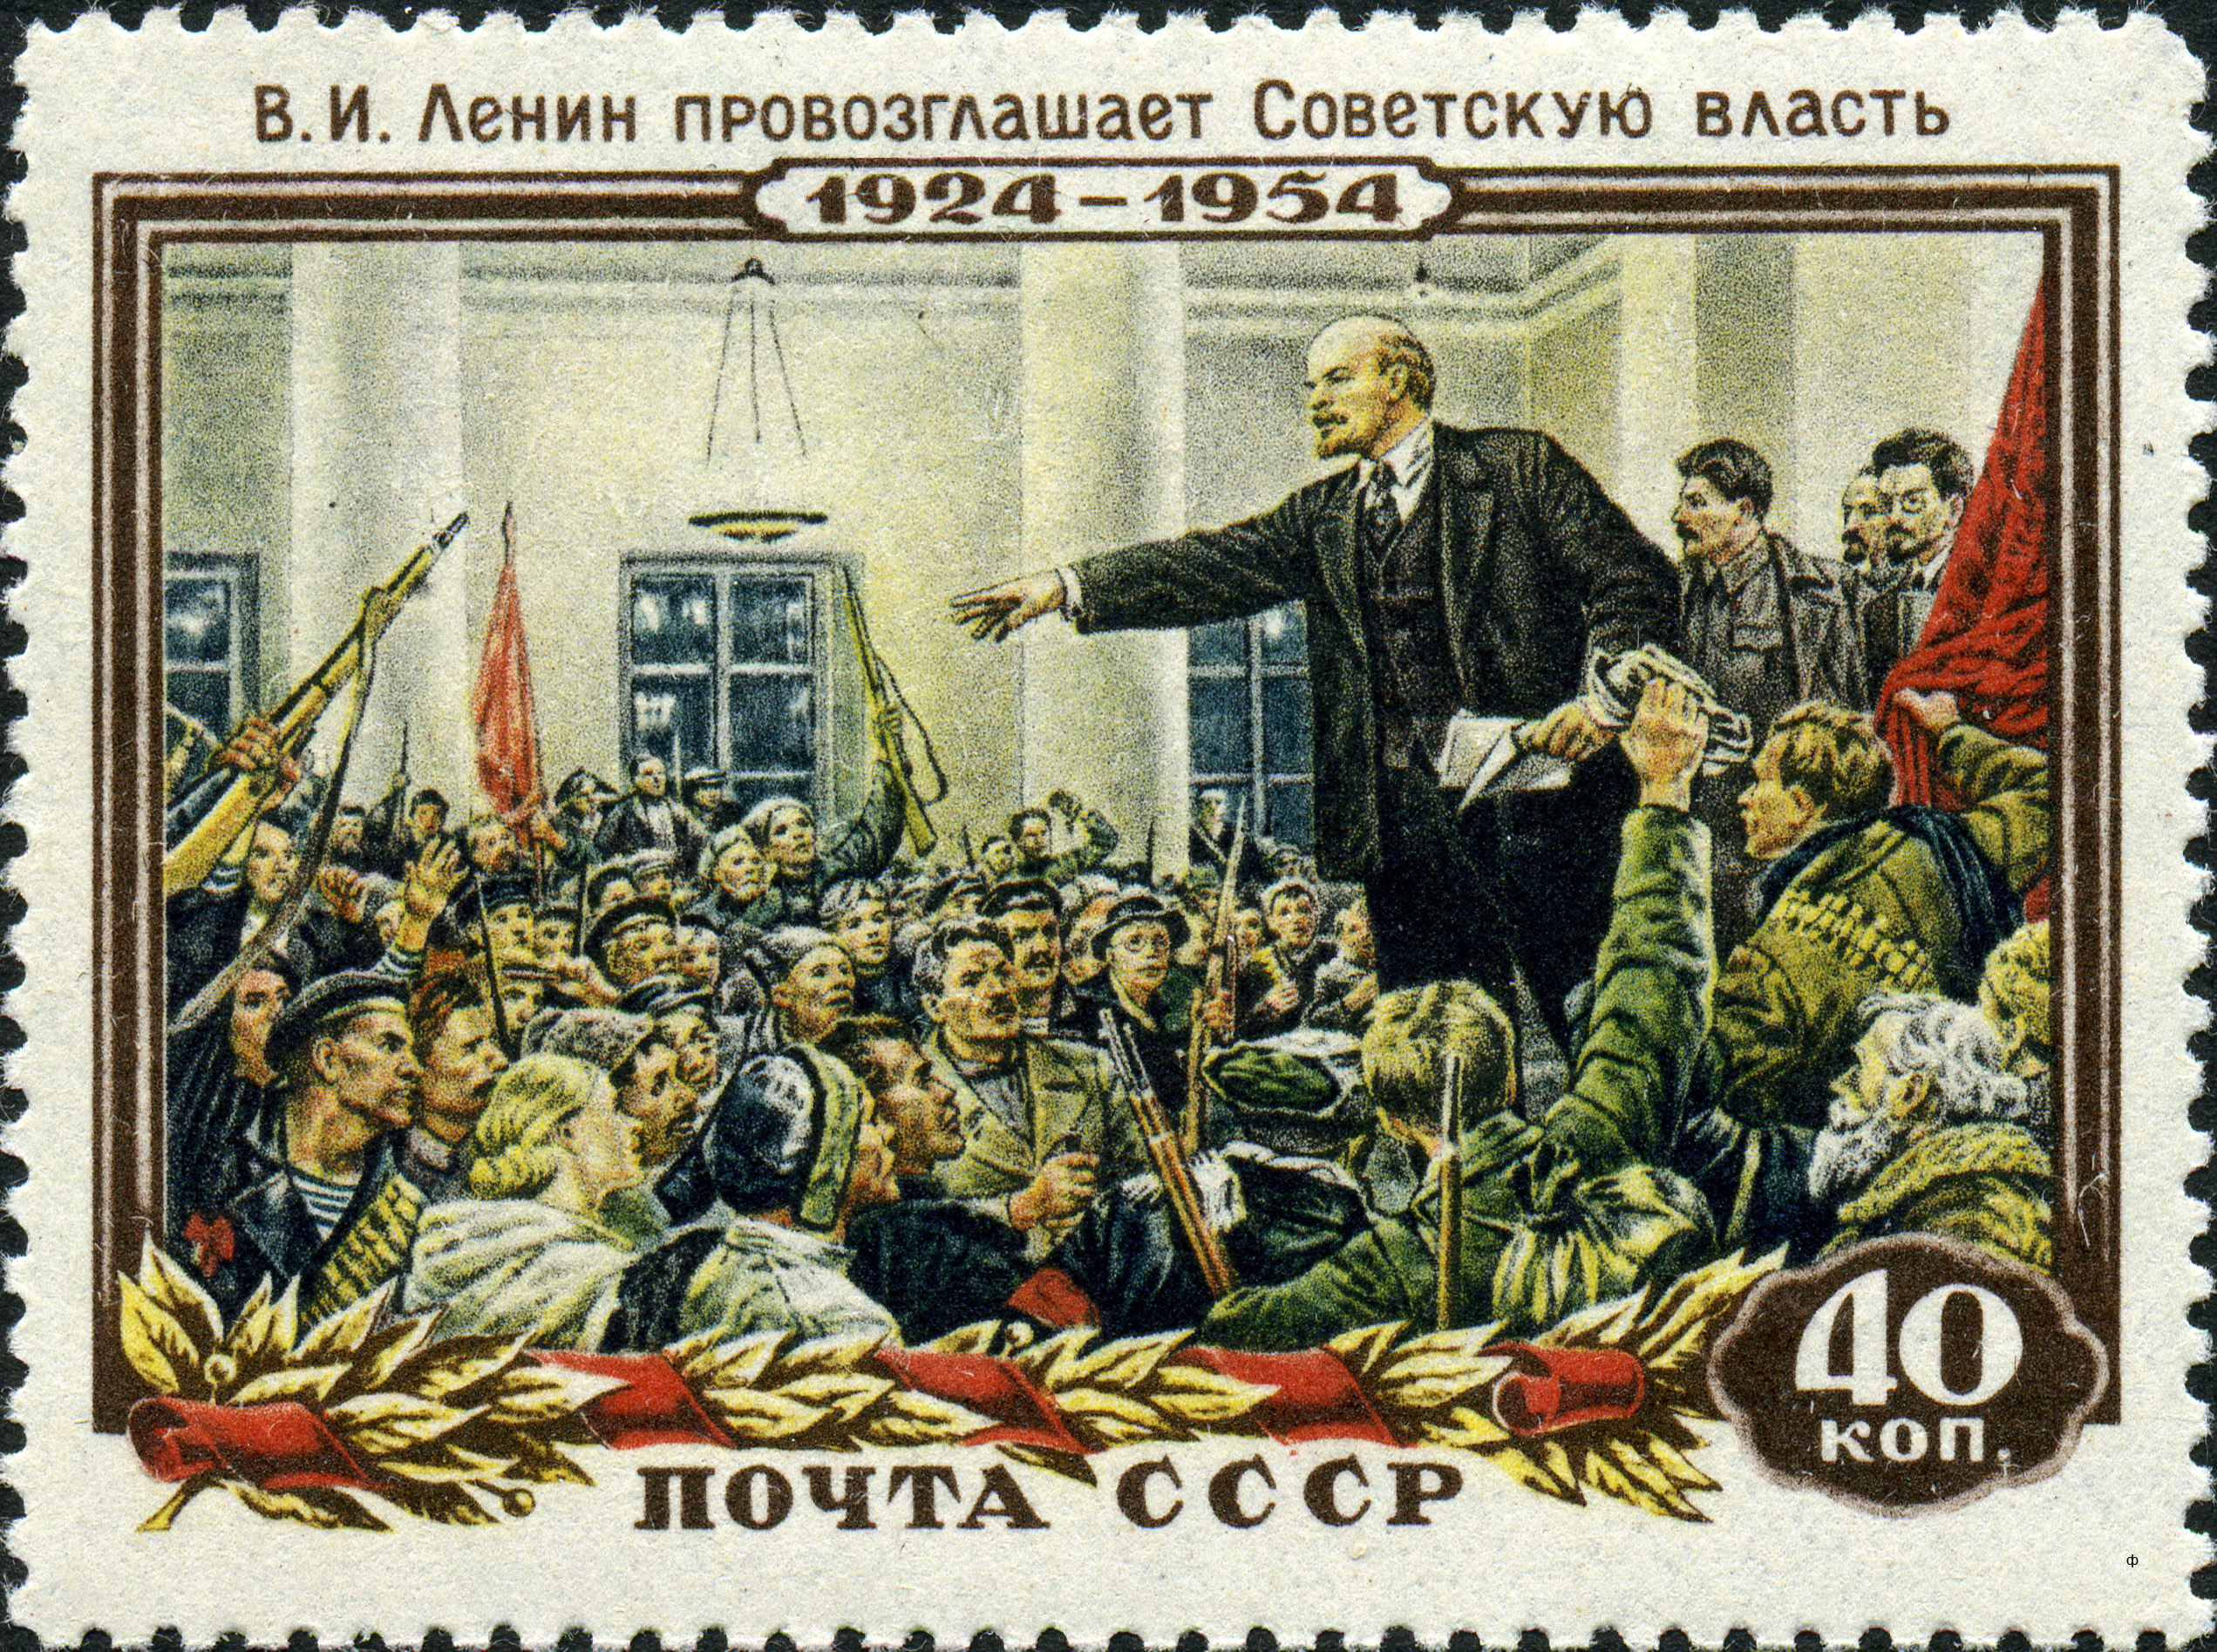 Stamp of the USSR. Painter Serov, "Lenin proclaims the Soviet power" (with Stalin), 1954.